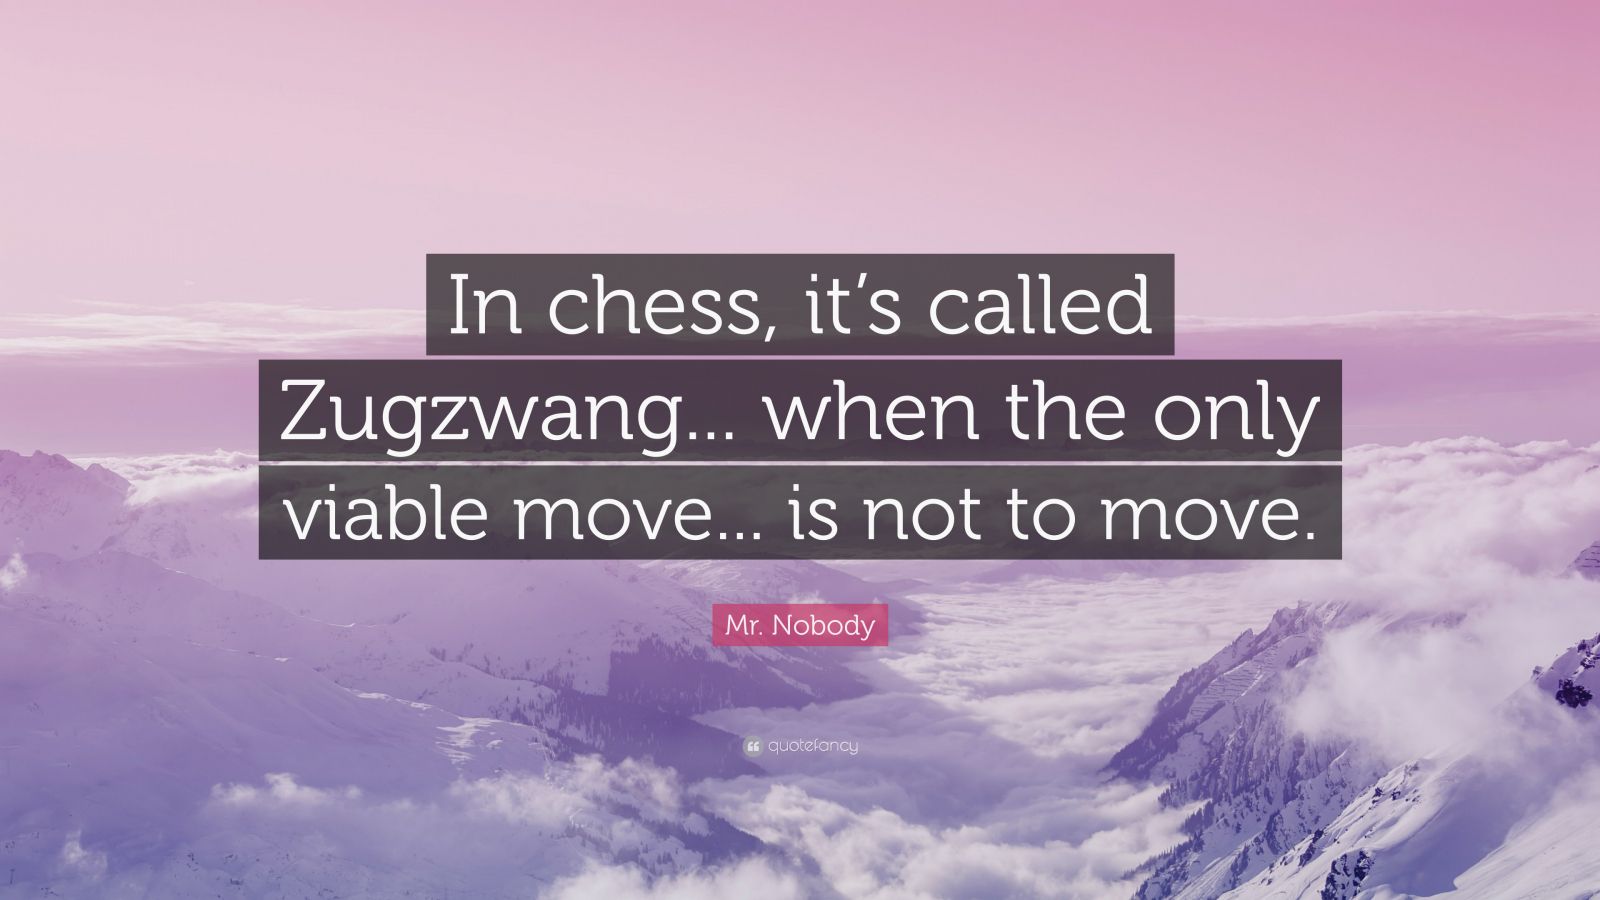 Mr. Nobody Quote: “In chess, it's called Zugzwang when the only viable  move is not to move.”